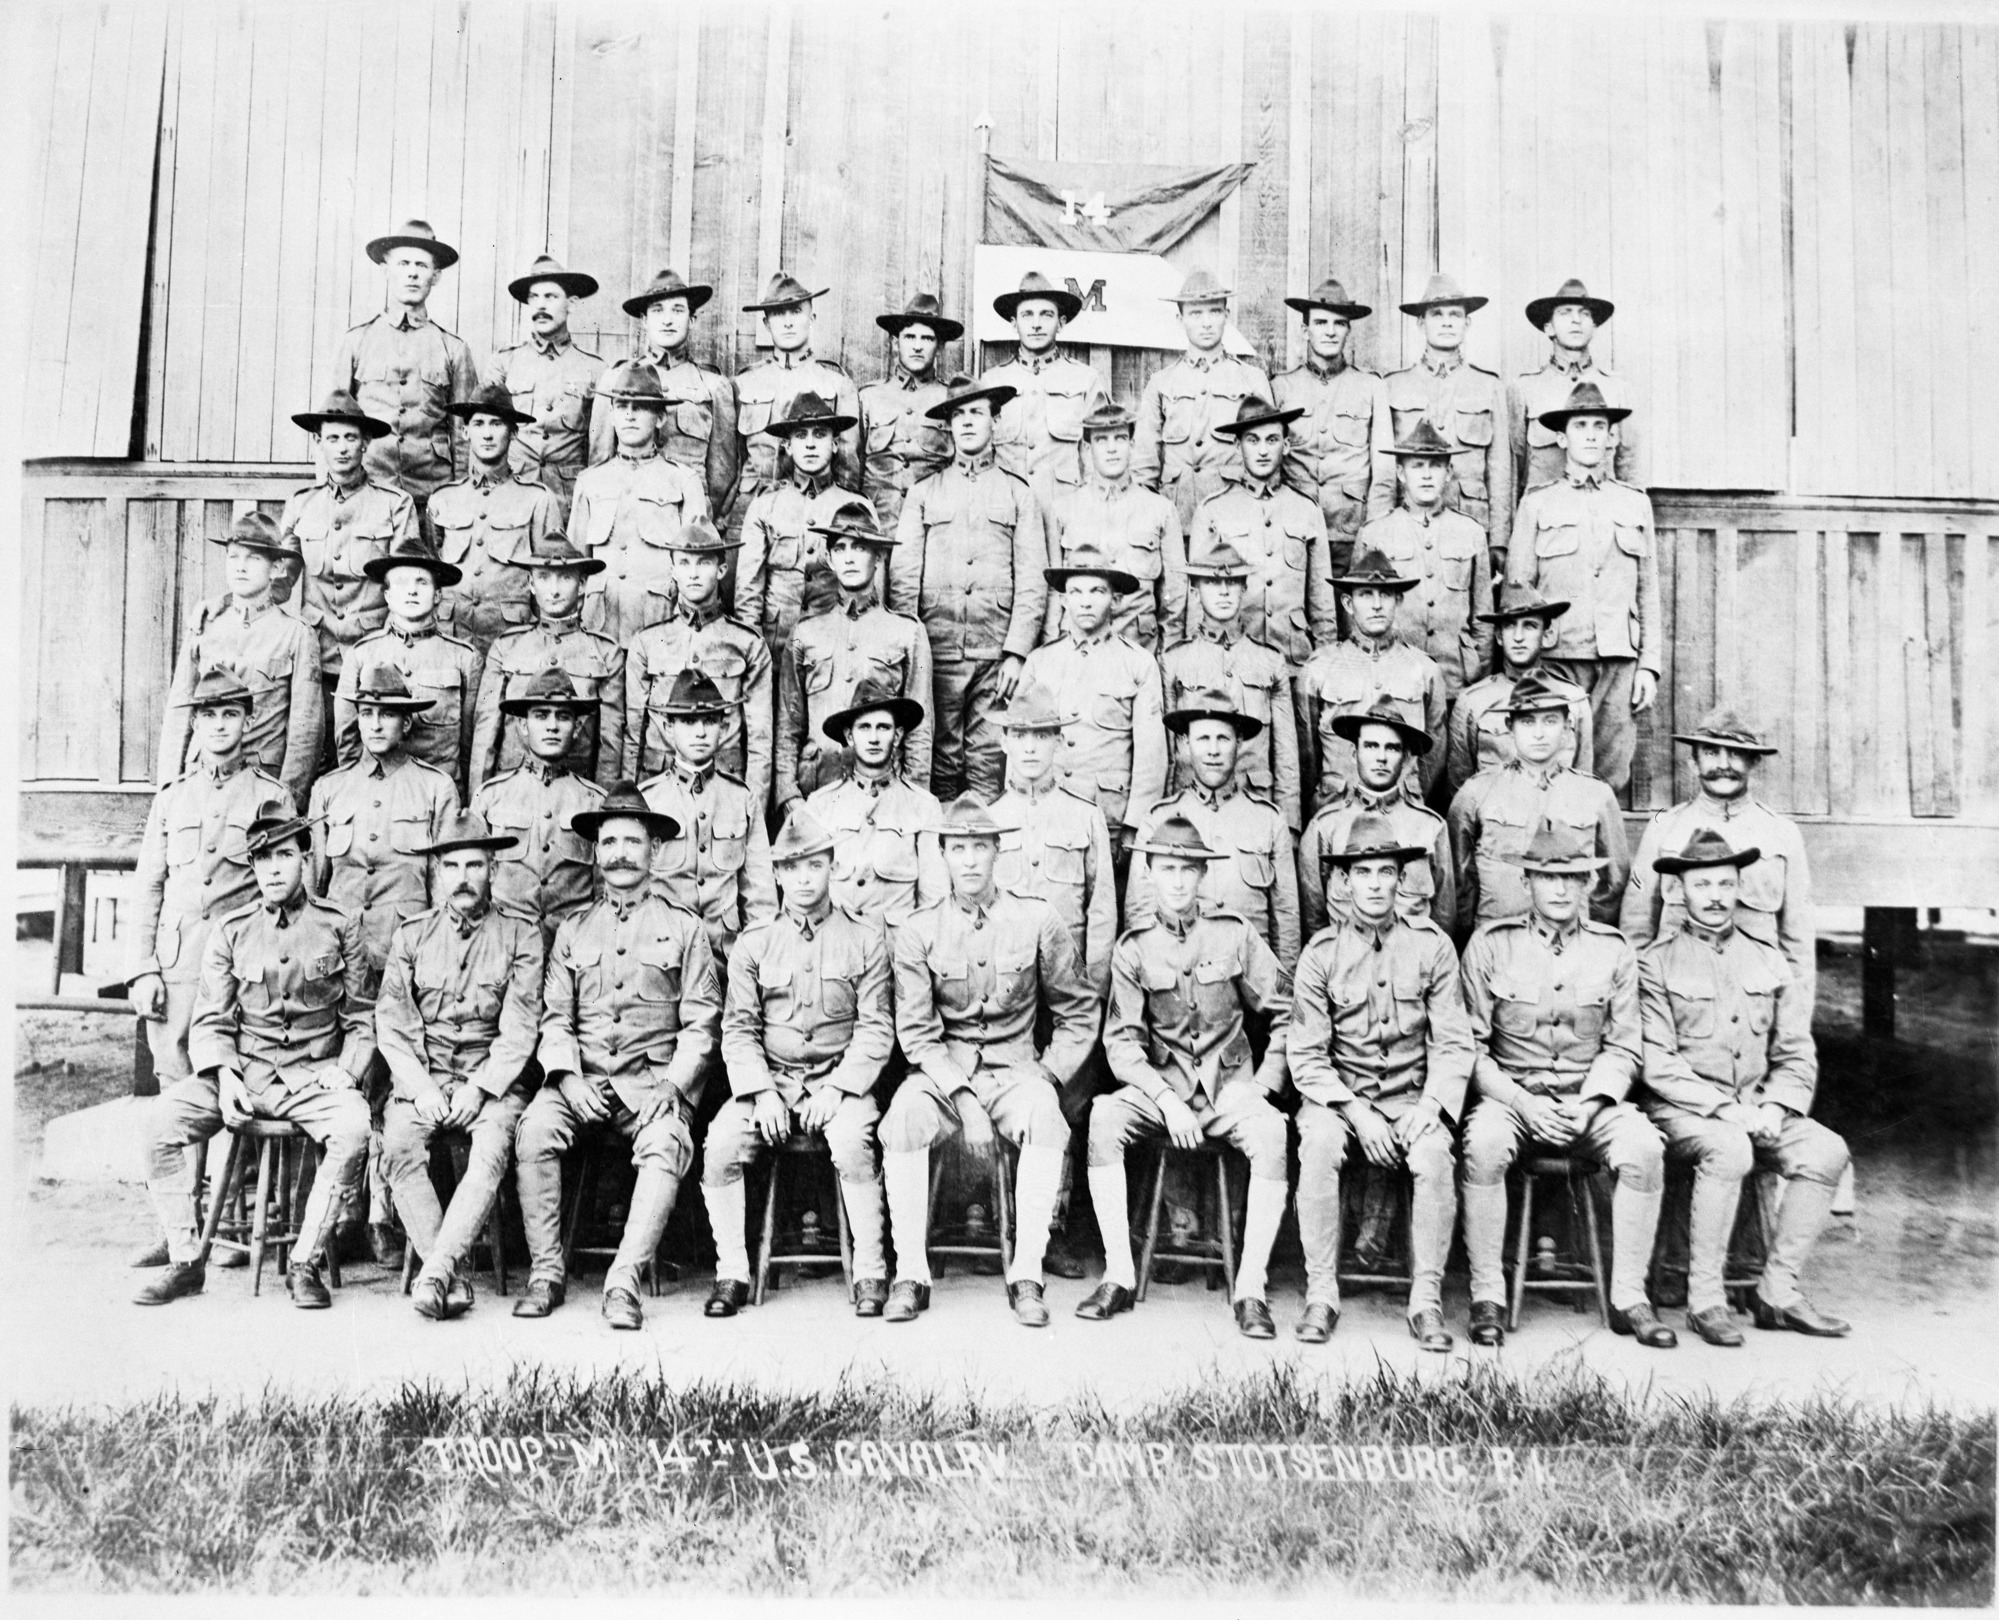 Troop "M" 14th Cavalry Camp Stotsenburg, Phillipine Islands. (Used as reference for the cavalry uniform.)